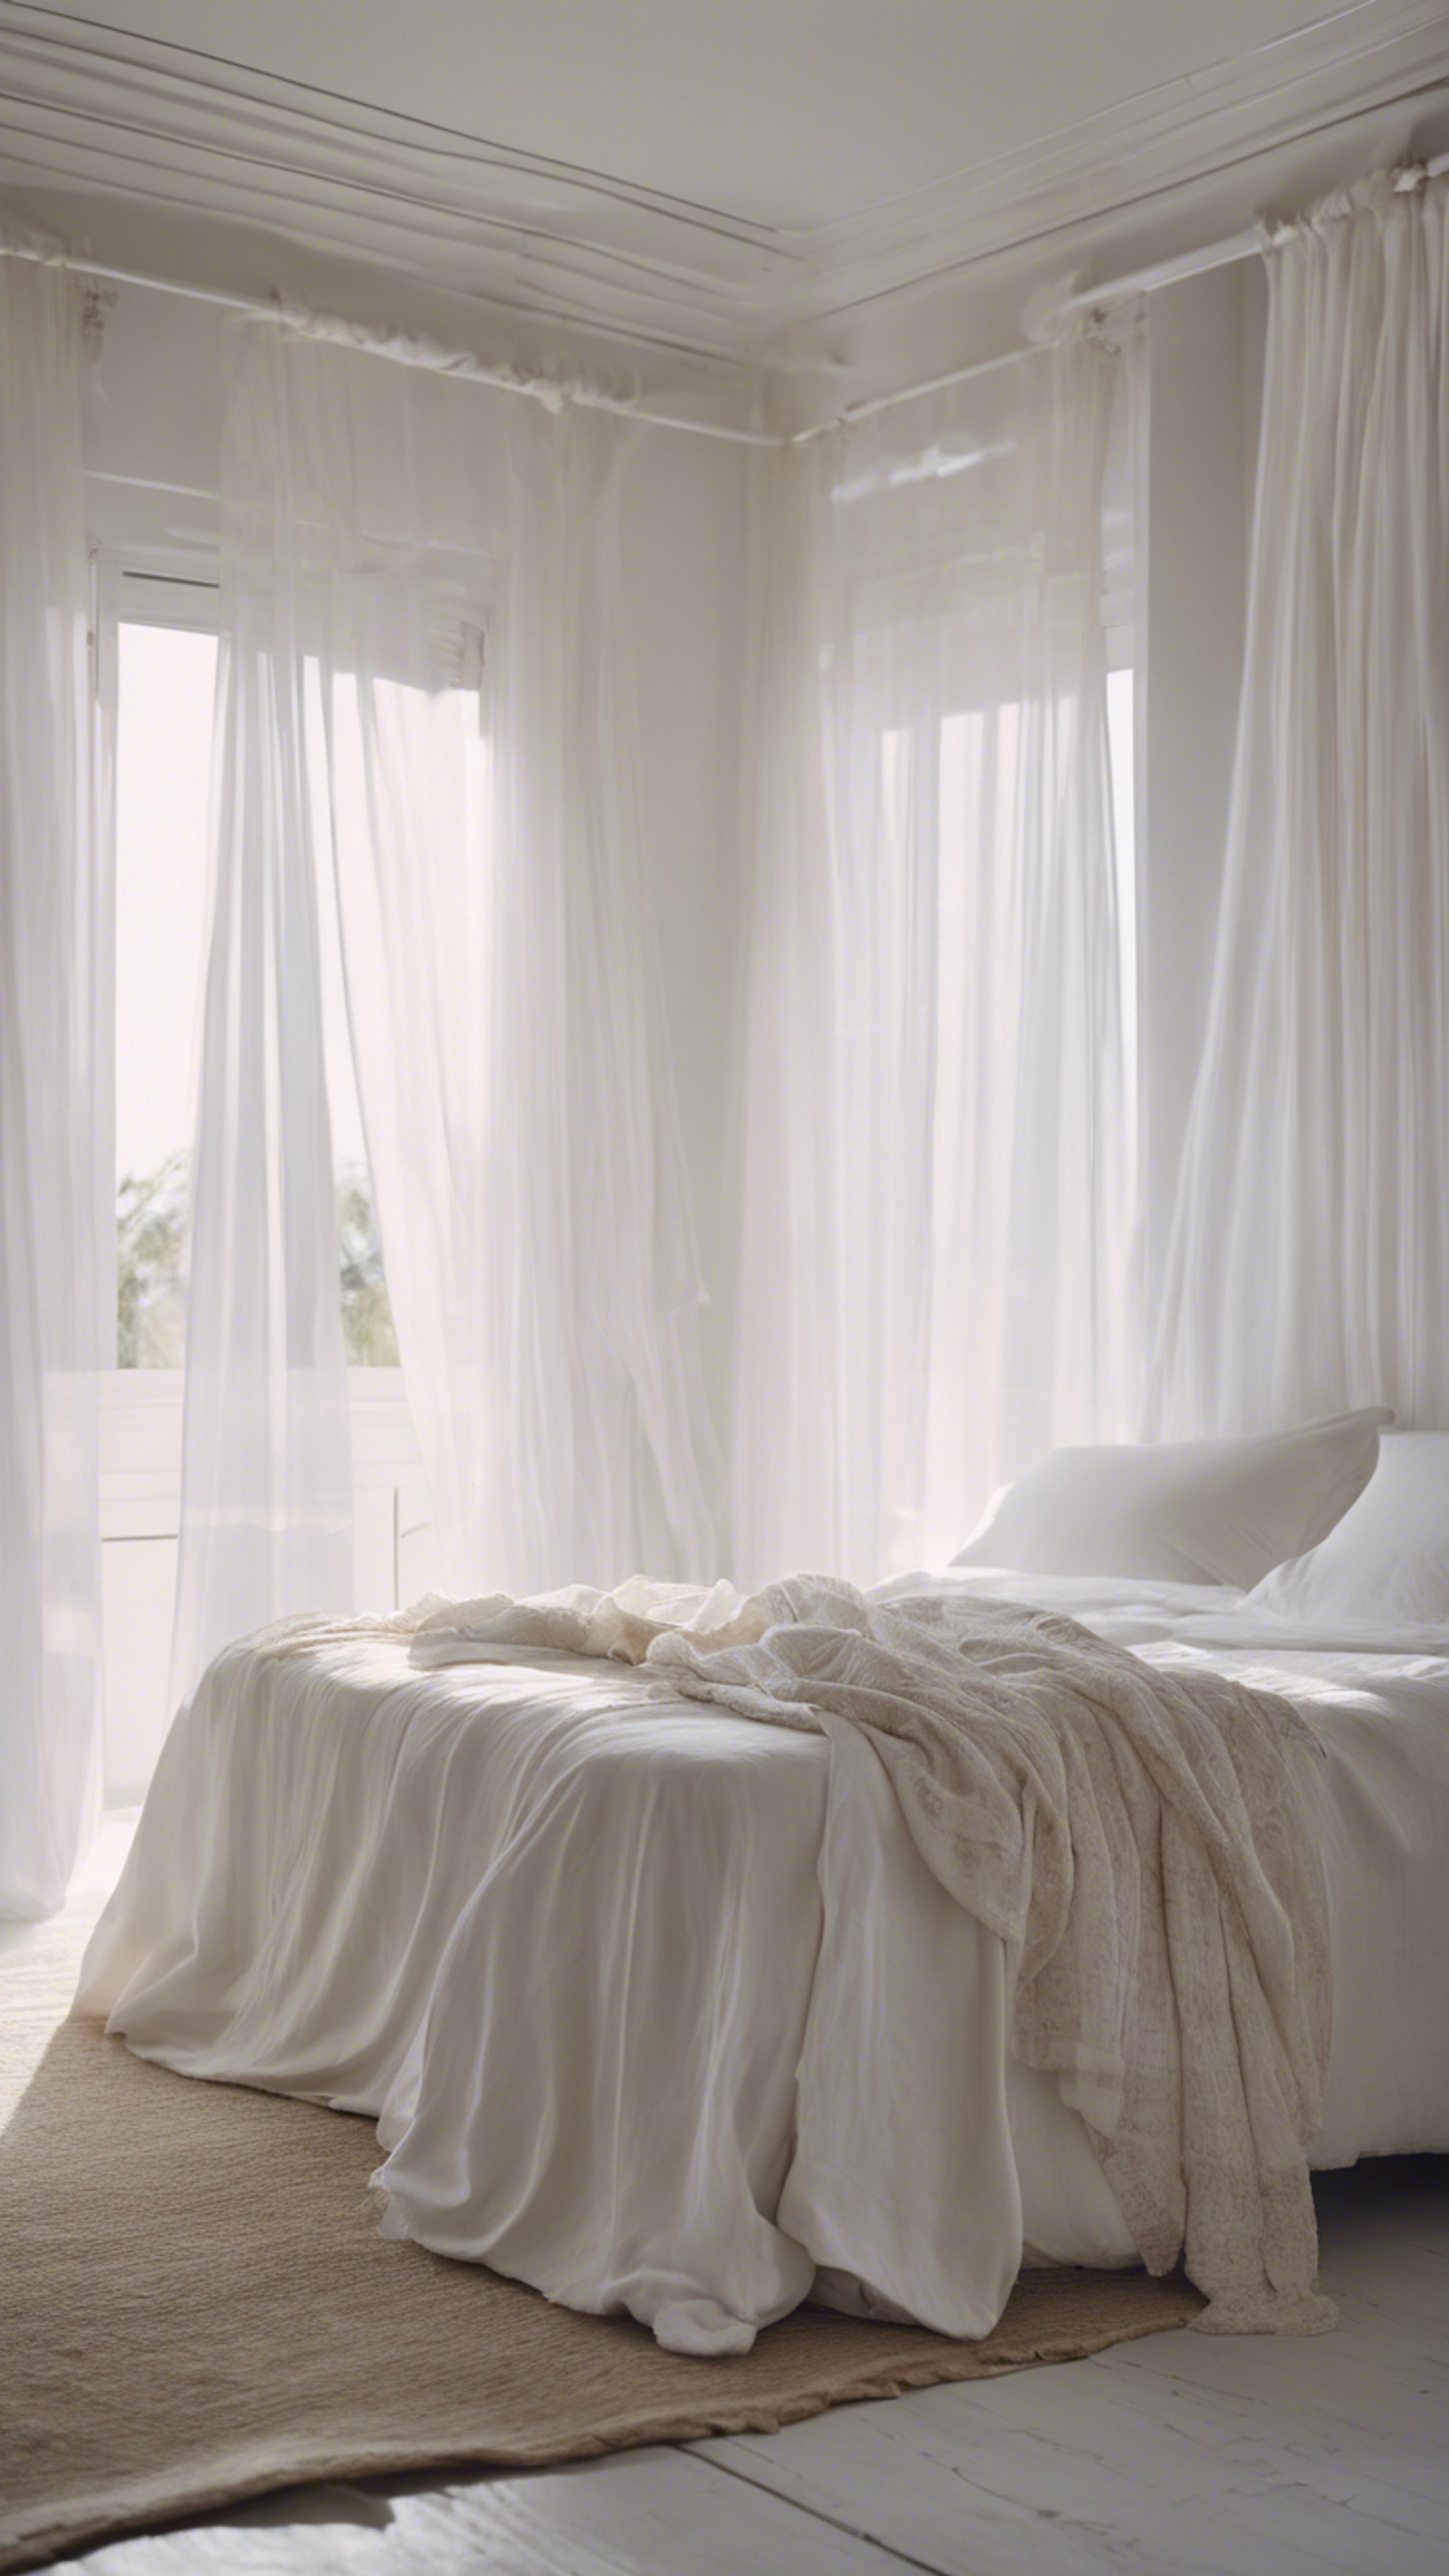 A dreamy white bedroom with sheer curtains blowing in the wind, white bed linens and an array of daylight from the window. ផ្ទាំង​រូបភាព[01f8a65ac1ab4b5d8d2d]